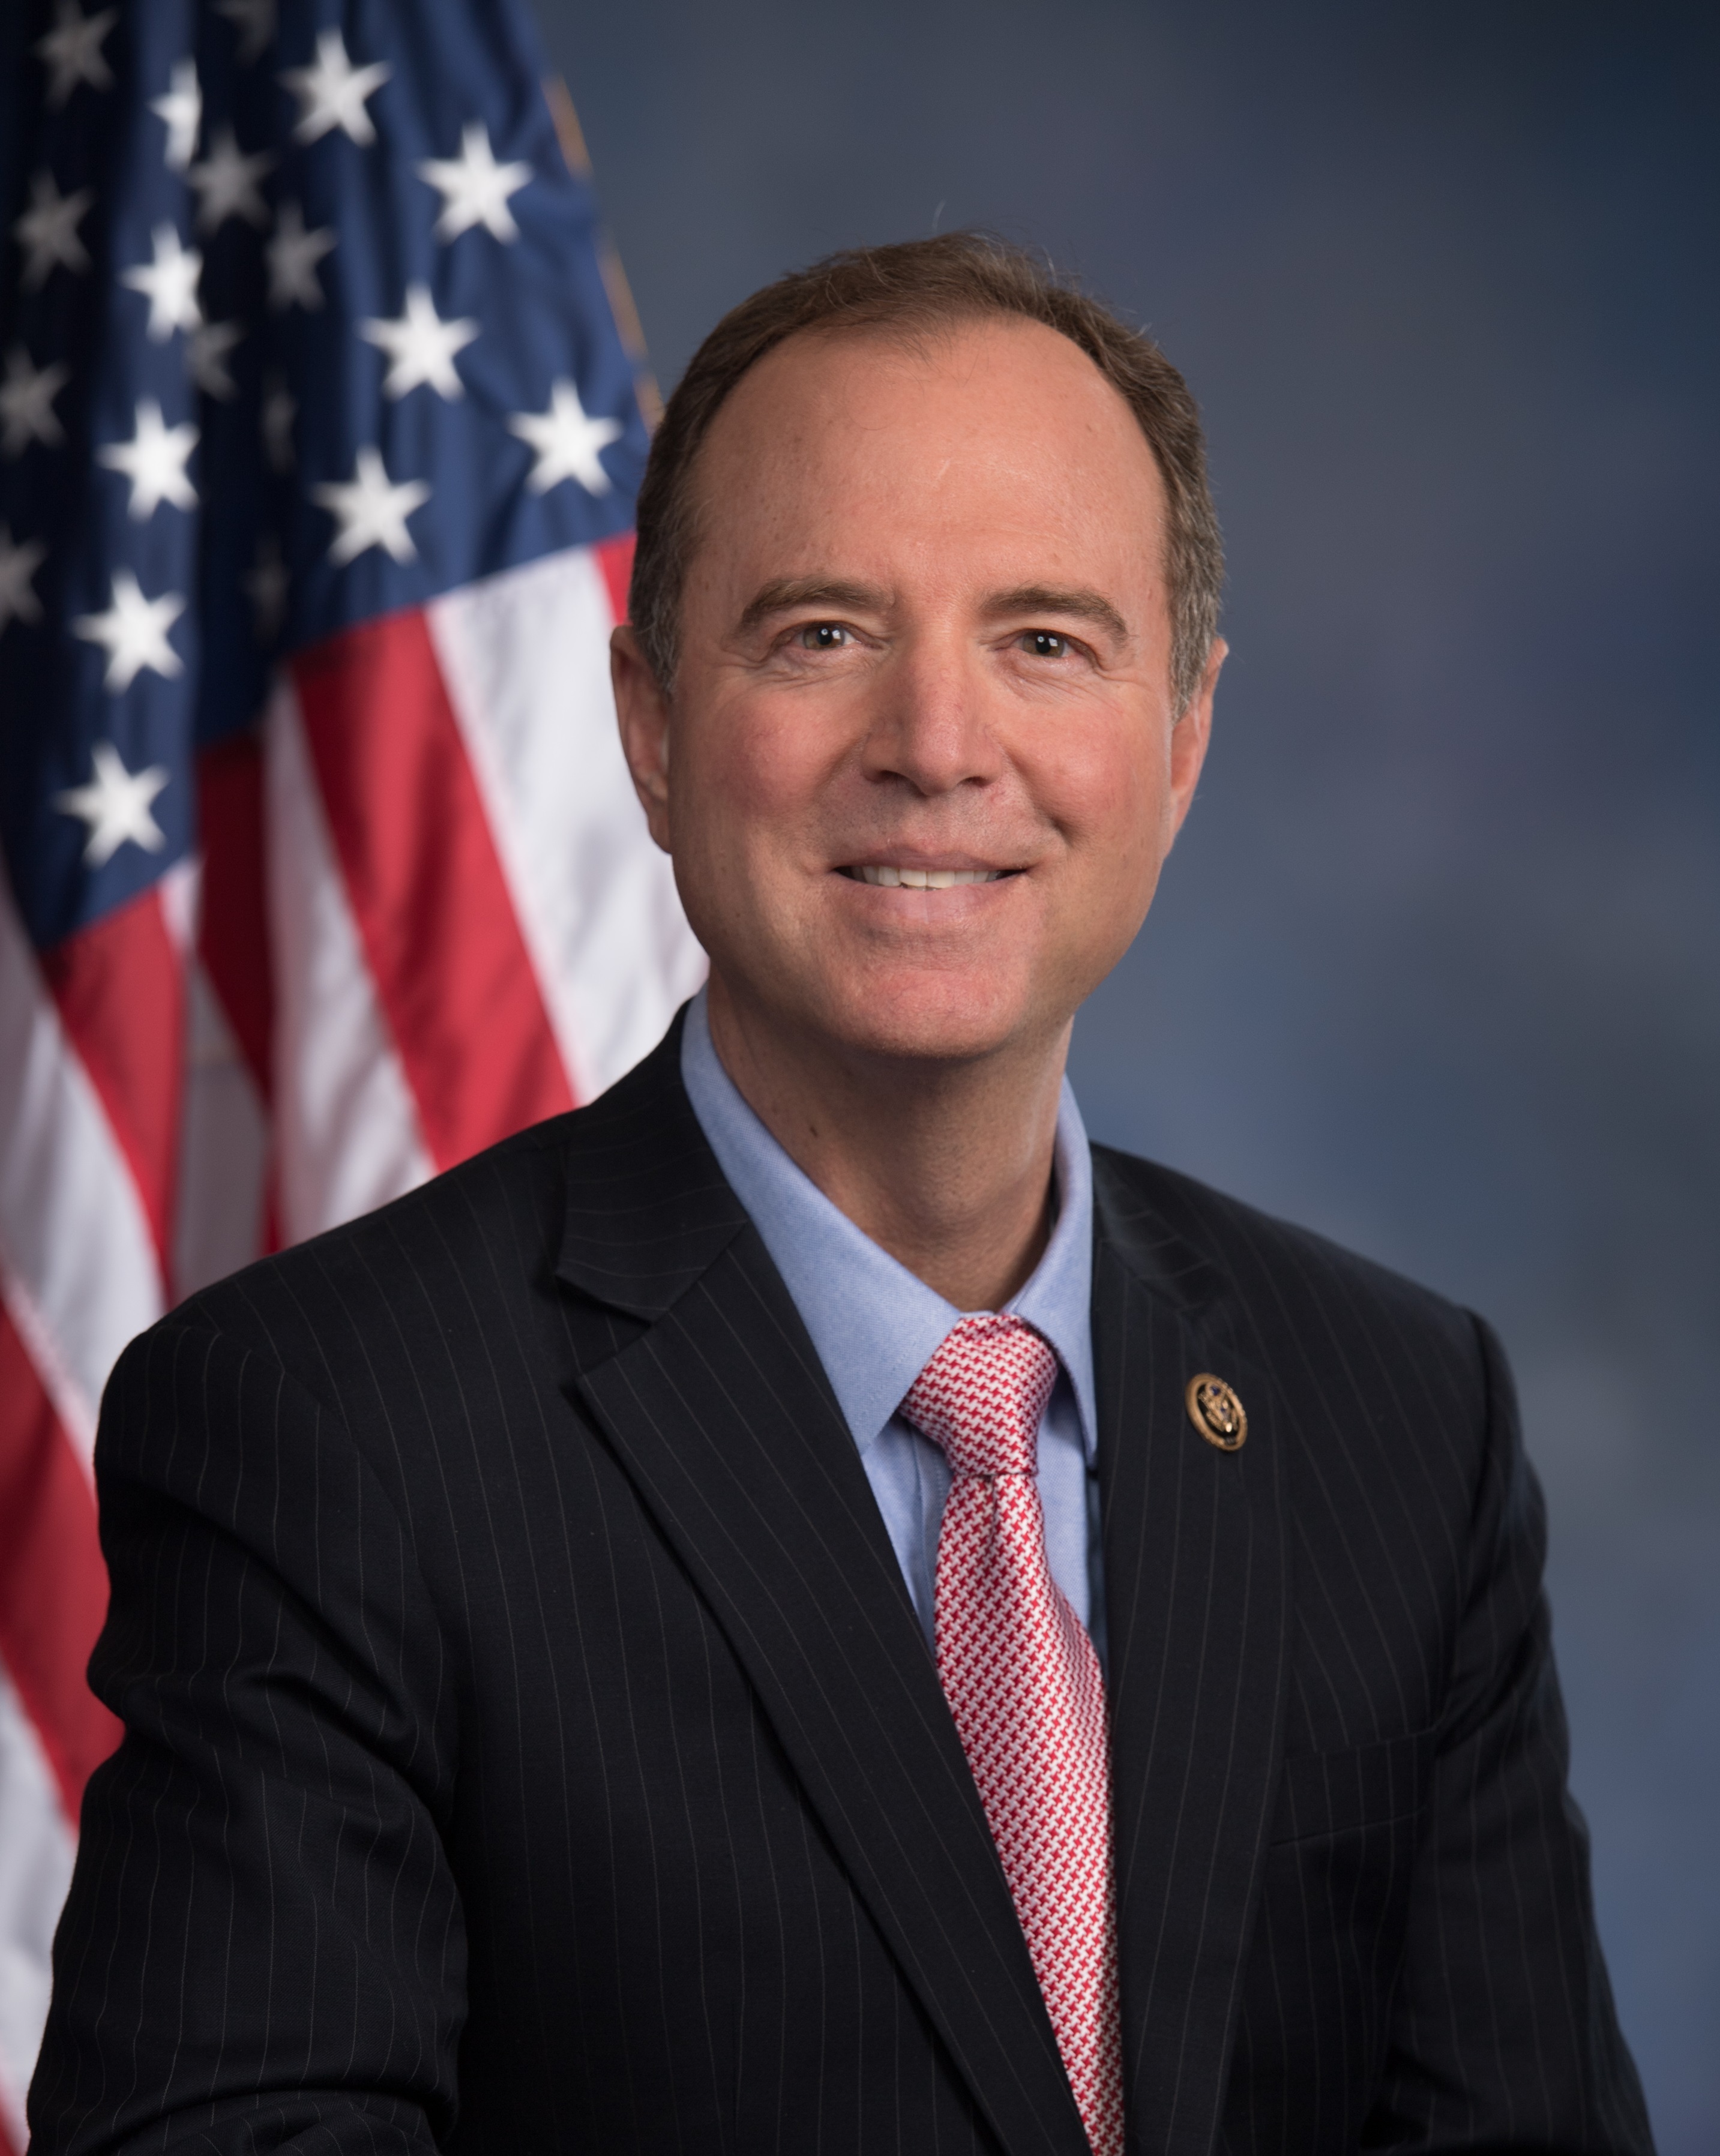 The Honorable Adam Schiff Another Congressional Space Enthusiast The